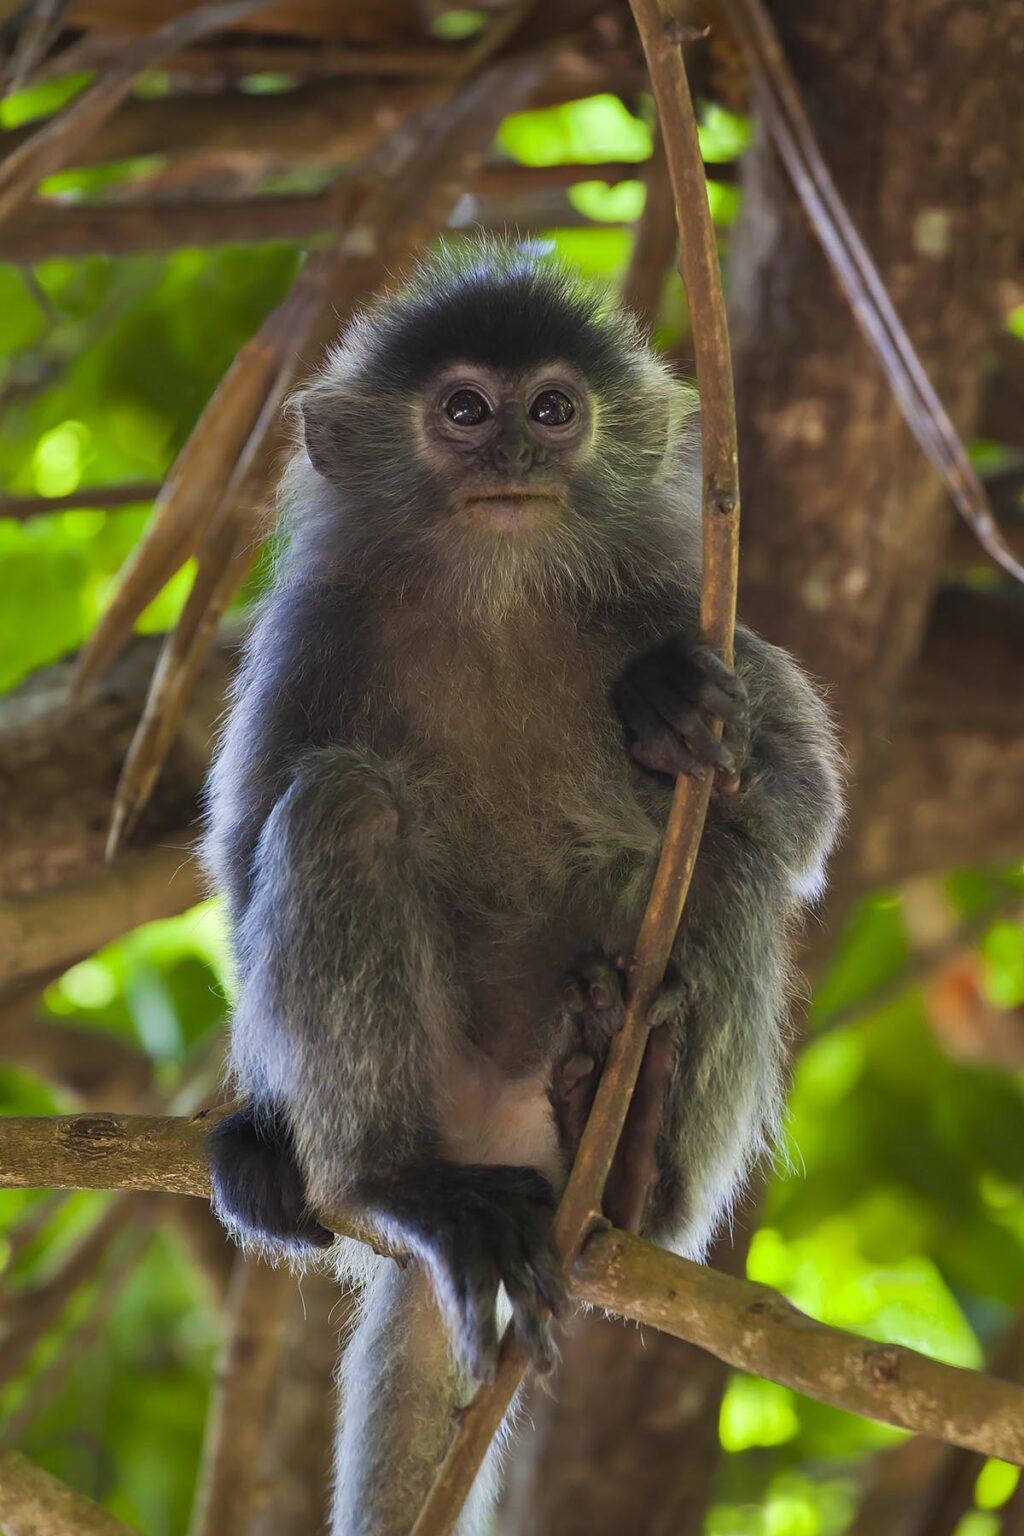 A baby SILVER BACKED LEAF MONKEY or SILVERY LUTUNG in BAKO NATIONAL PARK which is located in SARAWAK - BORNEO, MALAYSIA